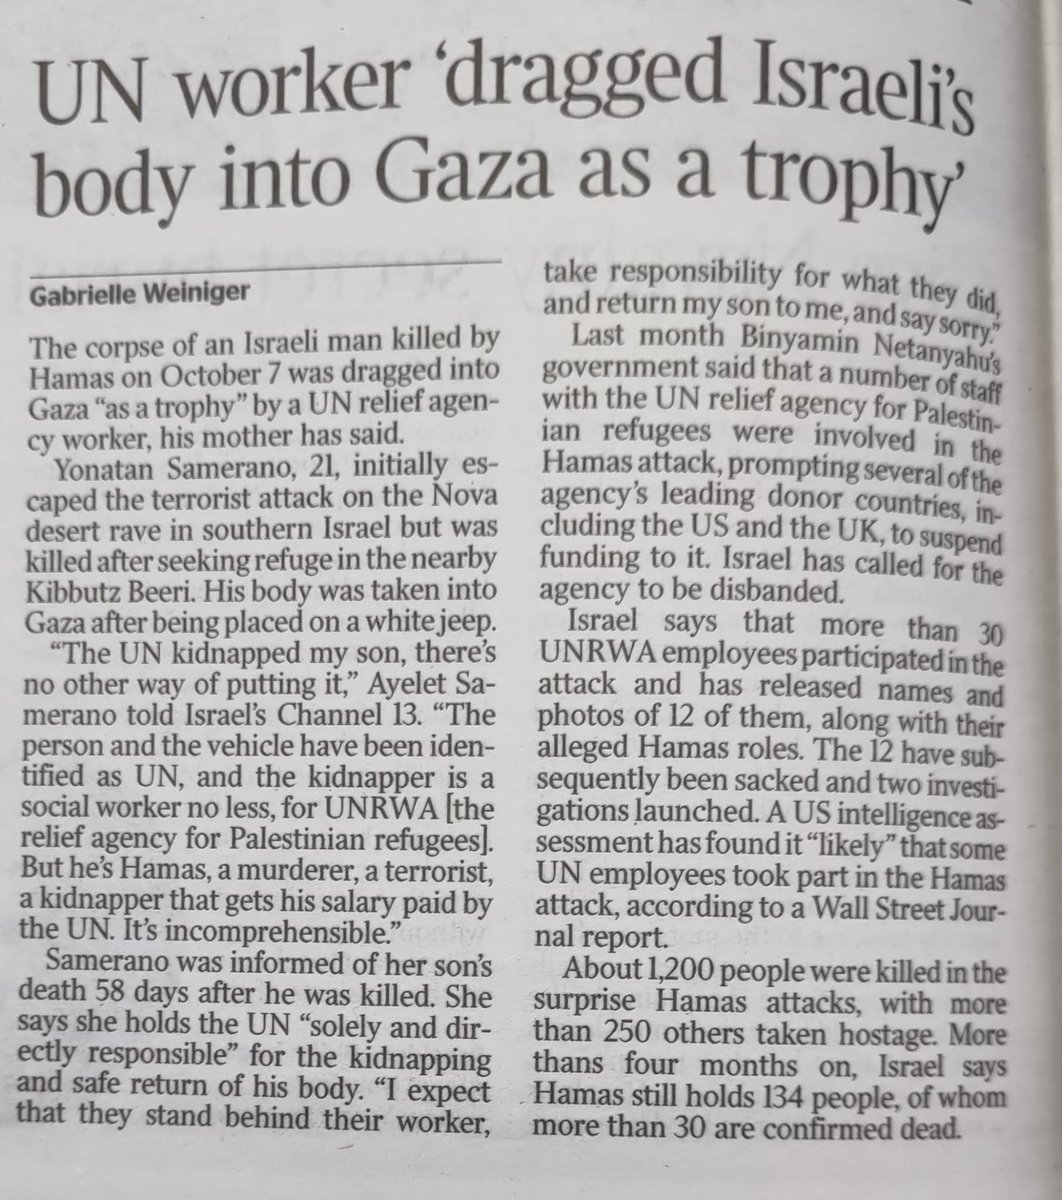 @UNRWA @UNWateridge @BBC The top job for the corrupt @UN today is covering up @UNRWA terrorism. They don't want their 75-year-mega-cash-cow shut down! @antonioguterres needs his private jets! #AbolishTheUN #DefundTheUN #DefundUNRWA #UNRWAisHamas